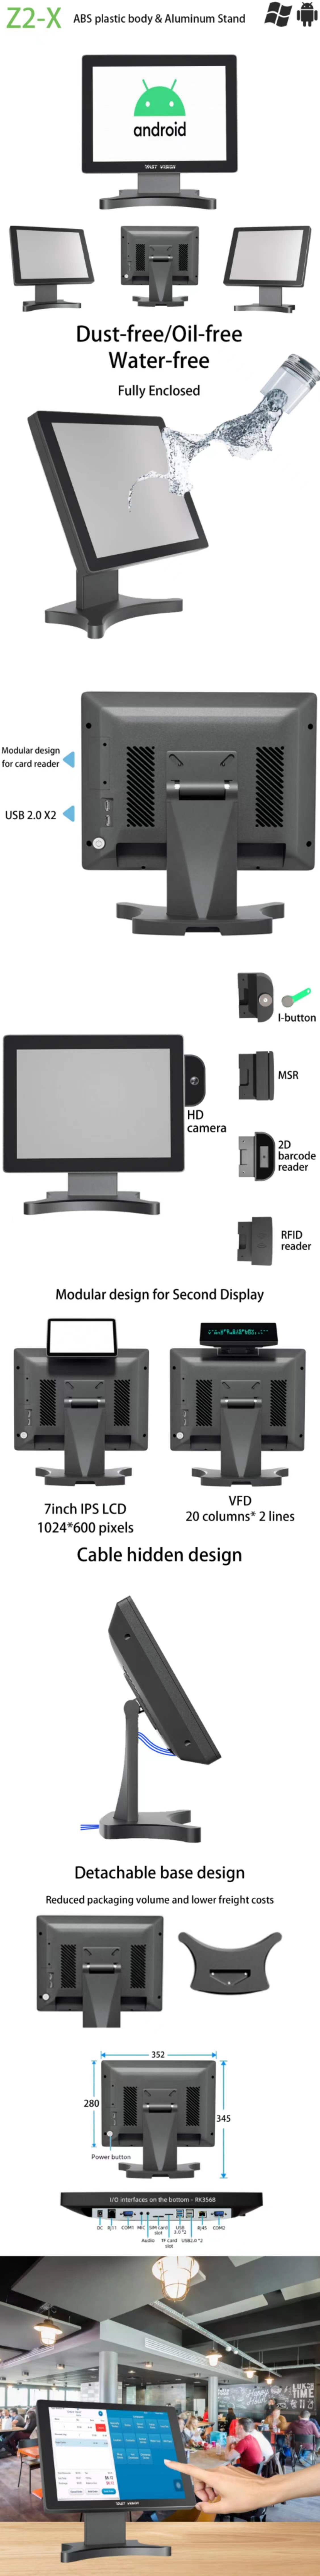 Android 11 pos machine 15 inch pos system.jpg